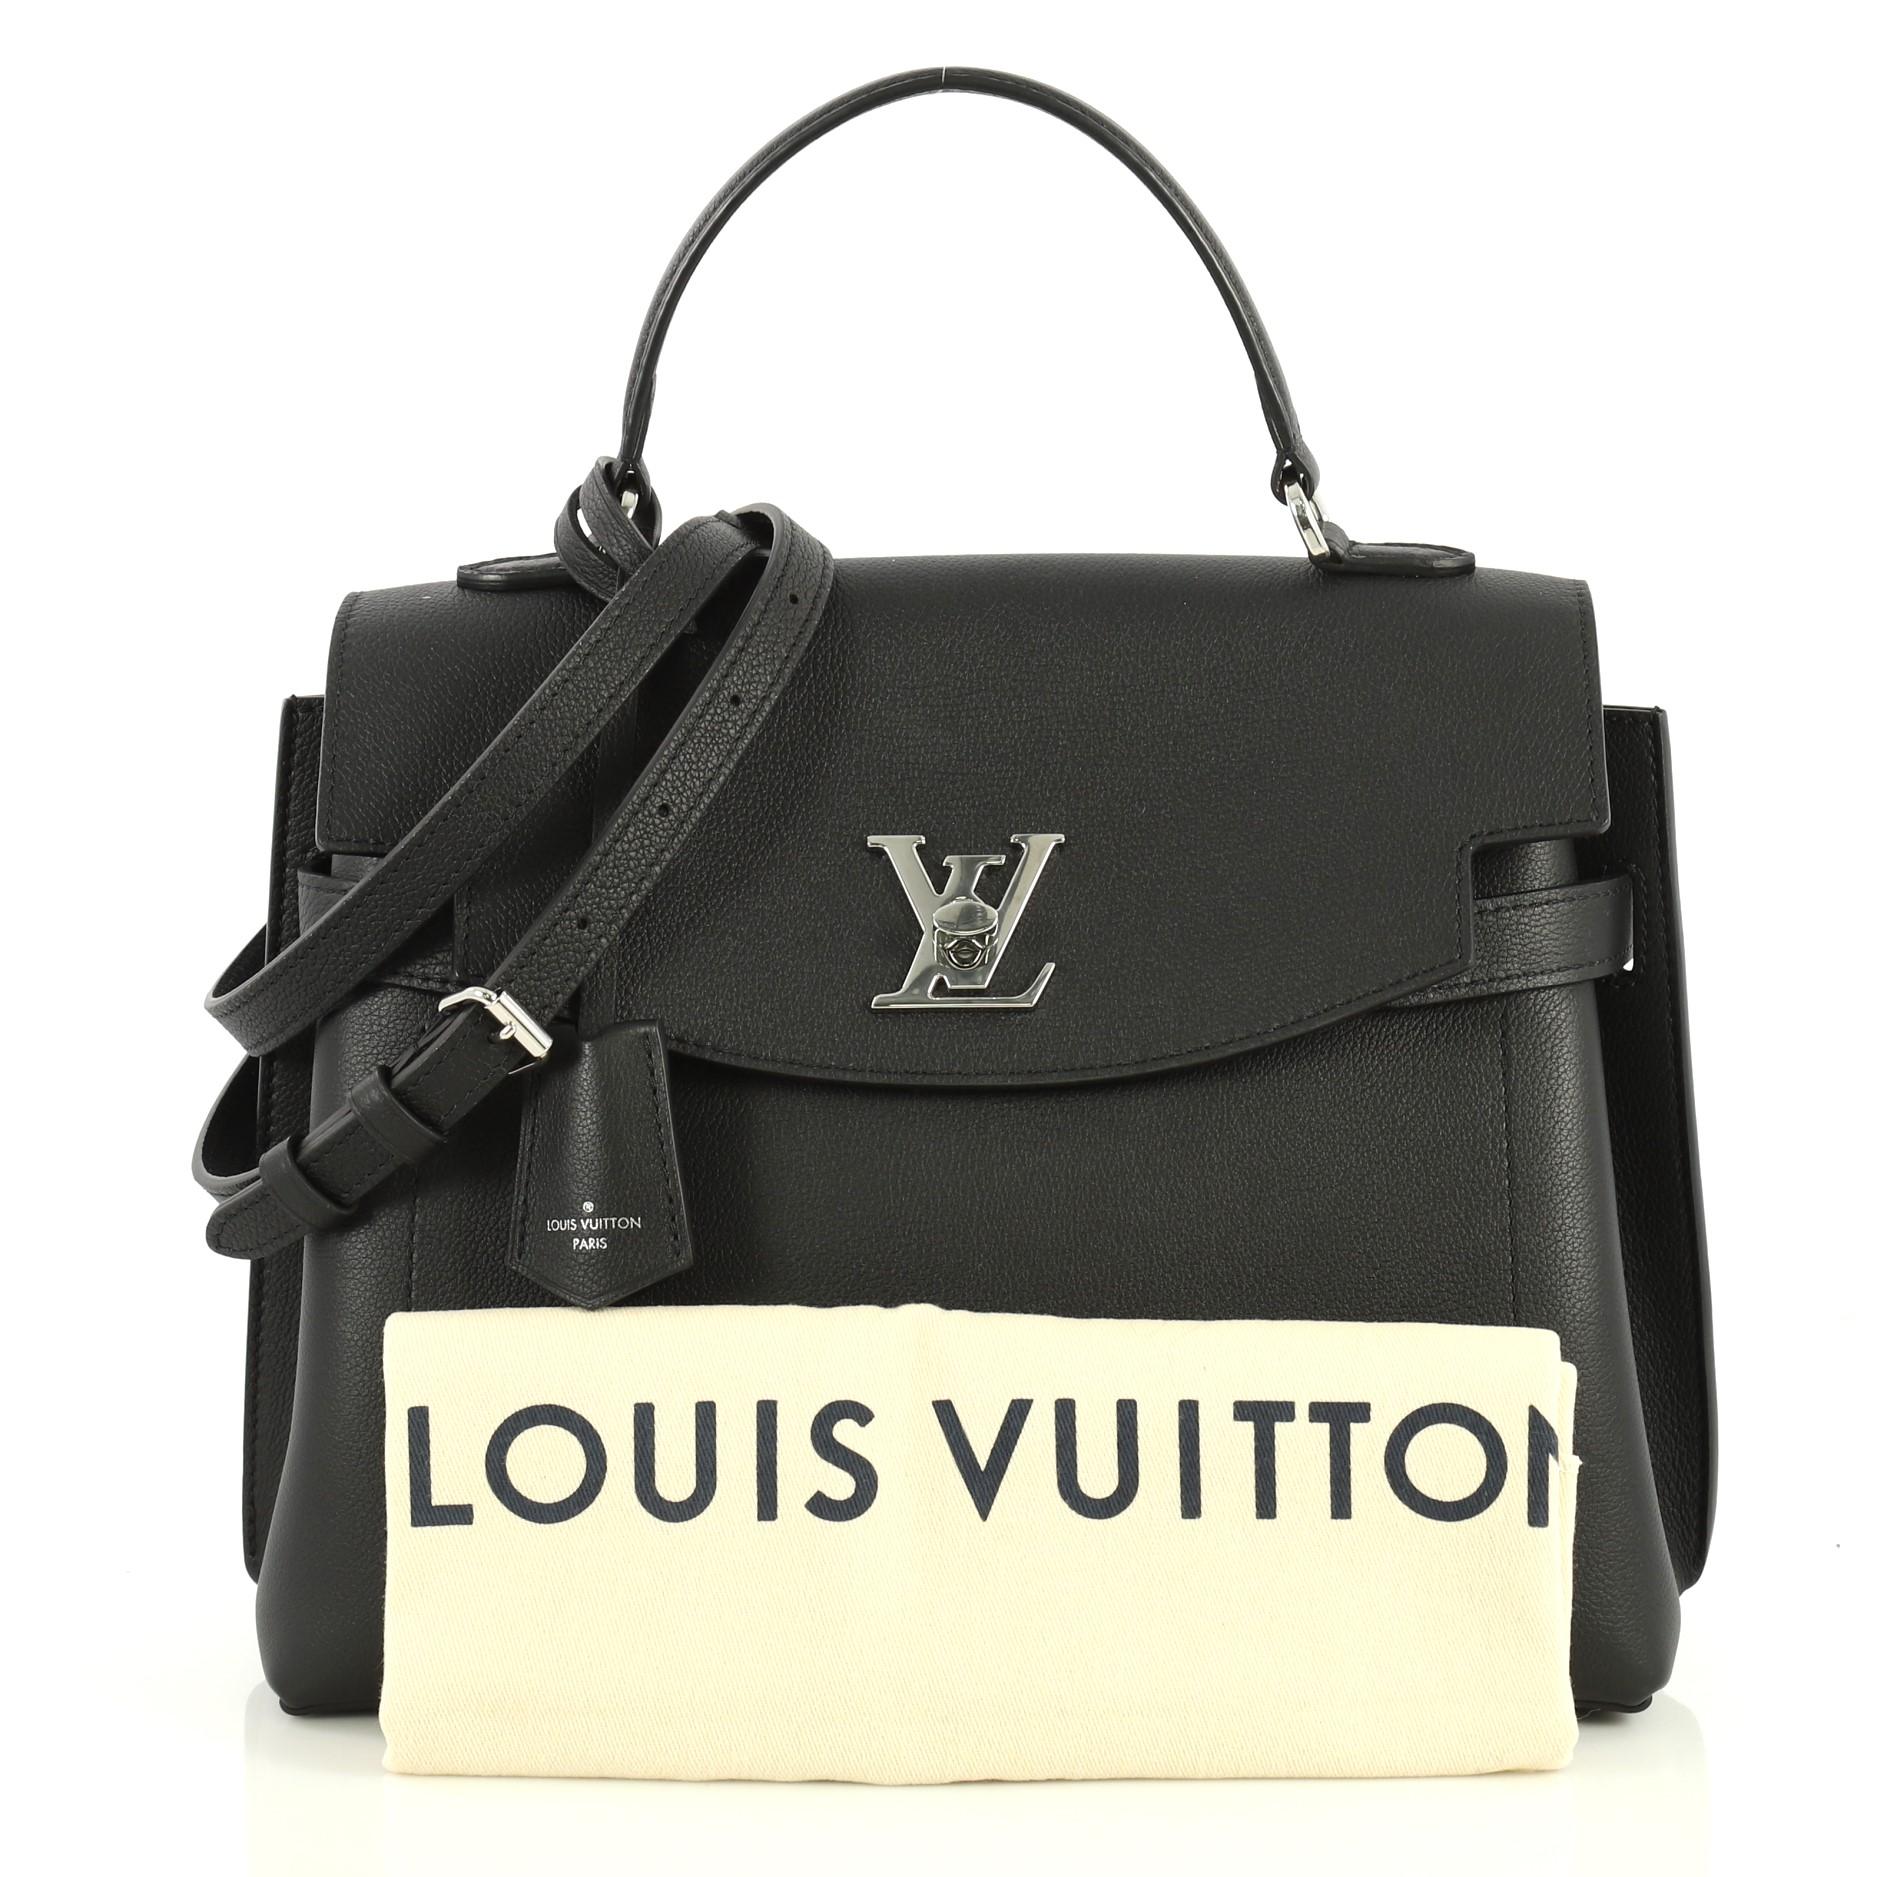 This Louis Vuitton Lockme Ever Handbag Leather MM, crafted in black leather, features a single loop leather handle and silver-tone hardware. Its flap with turn-lock closure opens to a black microfiber interior with slip pockets. Authenticity code